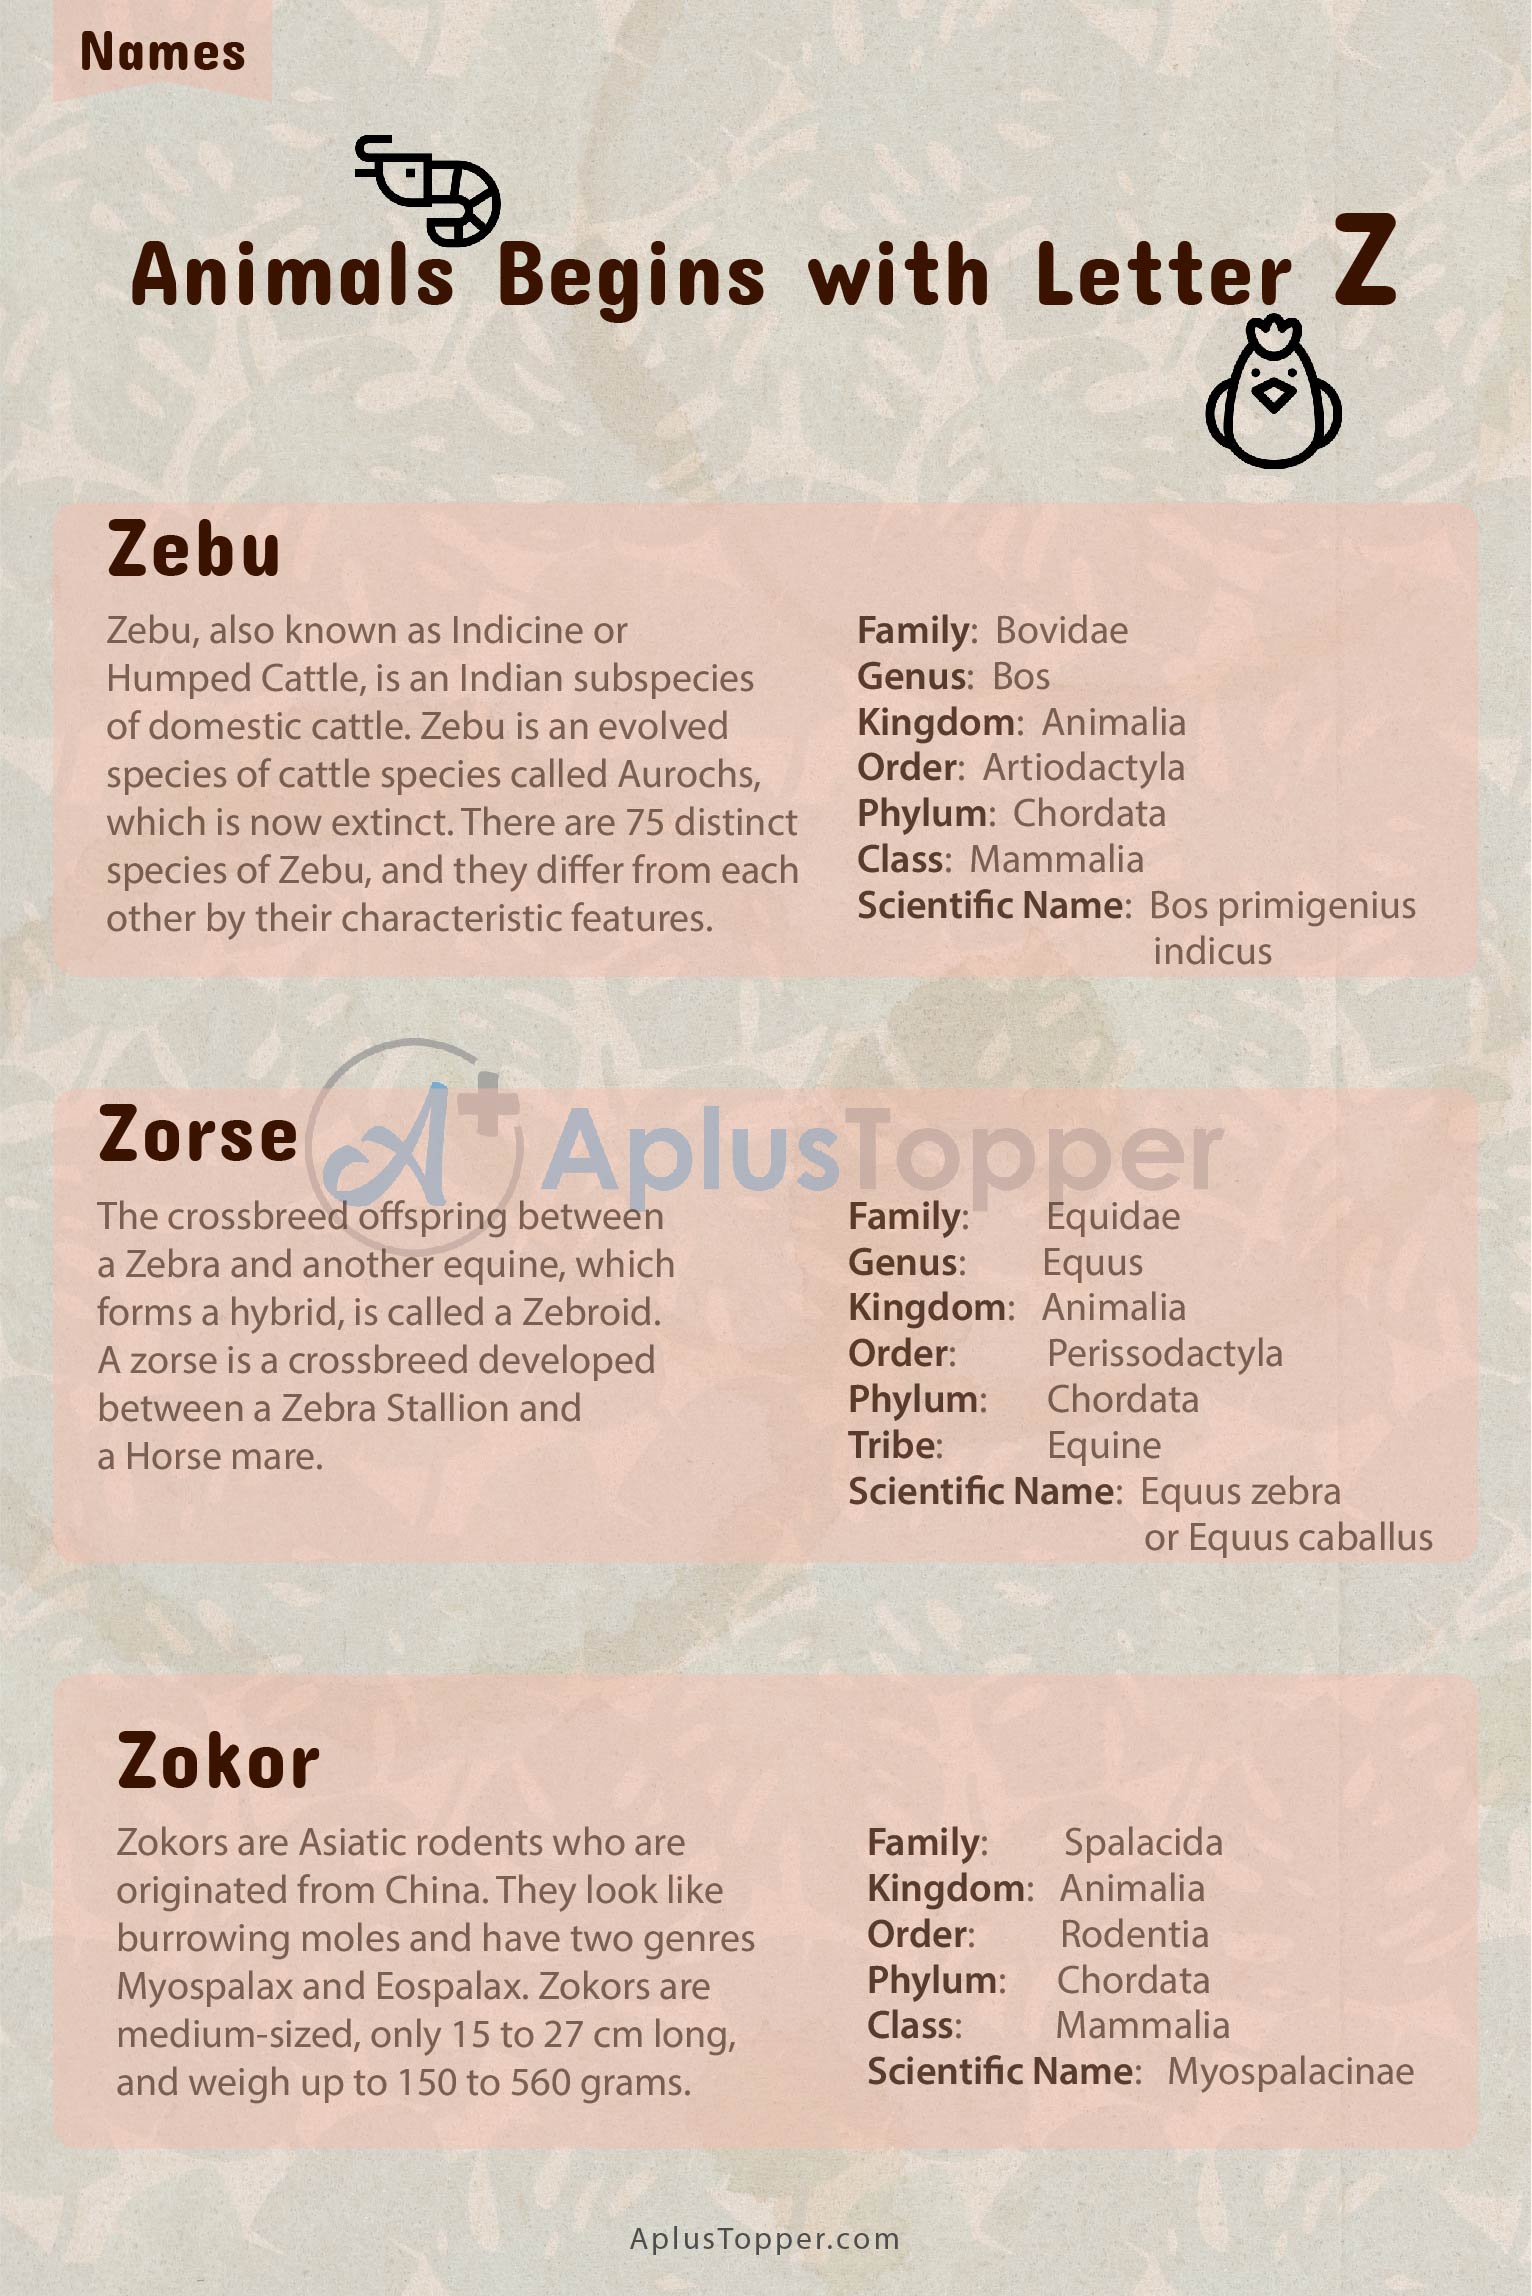 Animals that Start with Z | Listed with Pictures, List of Animals Starting  with Z & Interesting Facts - A Plus Topper